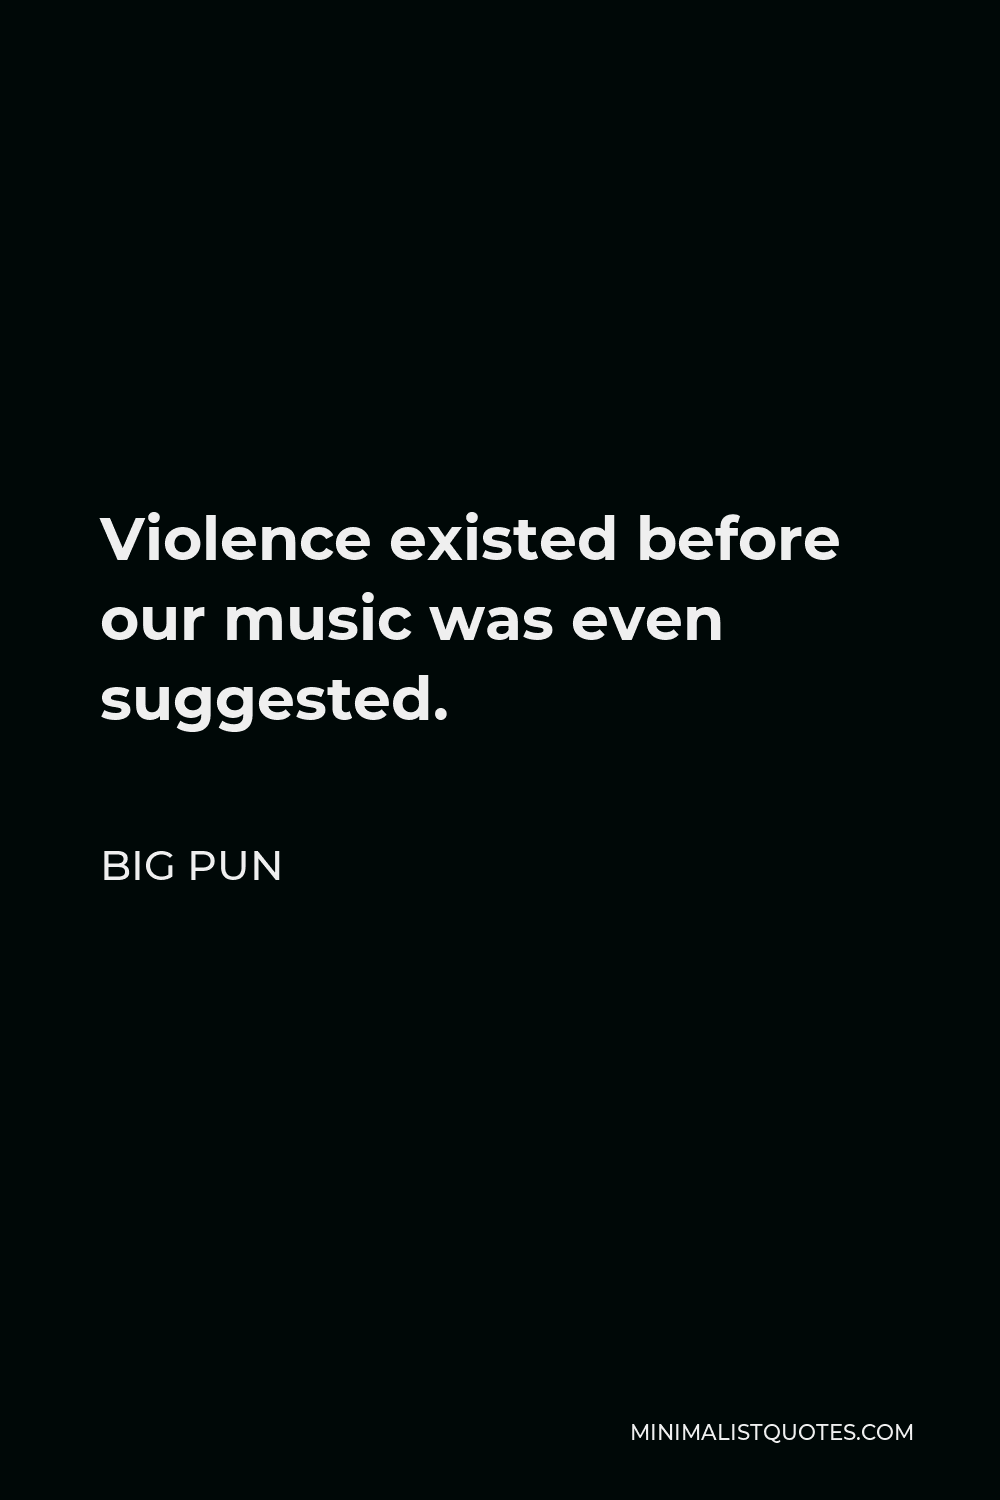 Big Pun Quote - Violence existed before our music was even suggested.